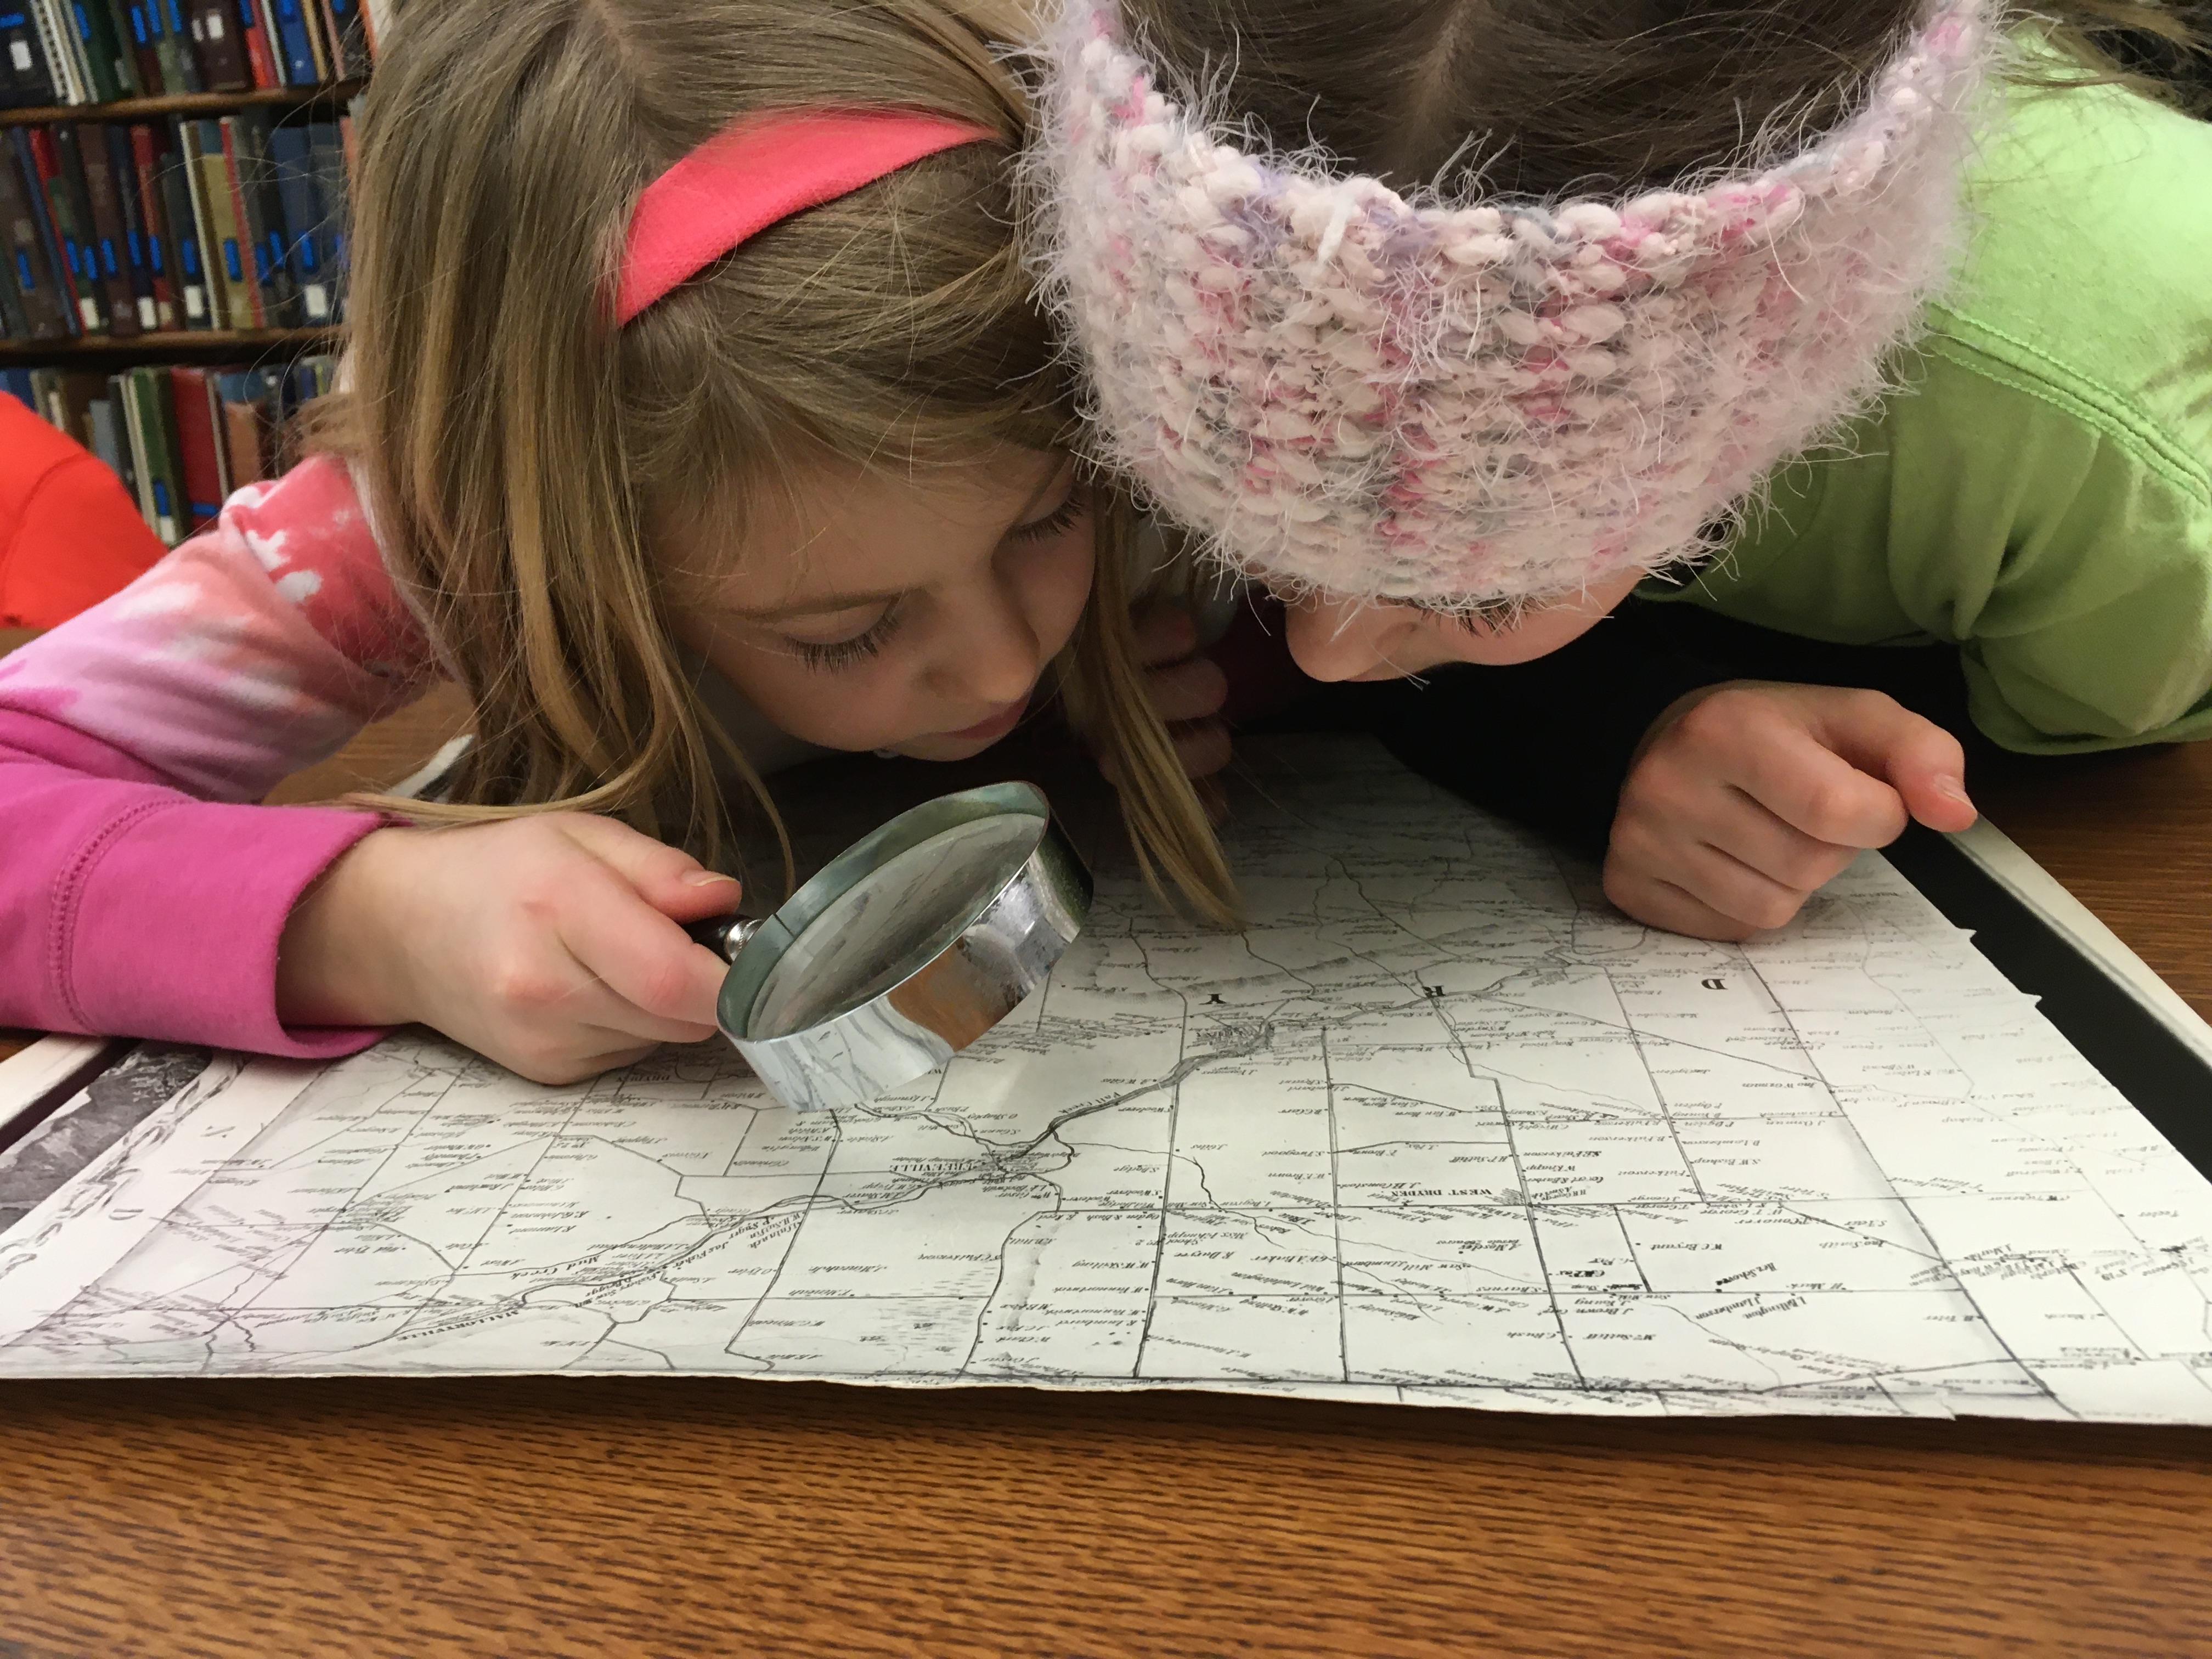 An image of two young girls looking at a map. One girl holds a magnifying glass.